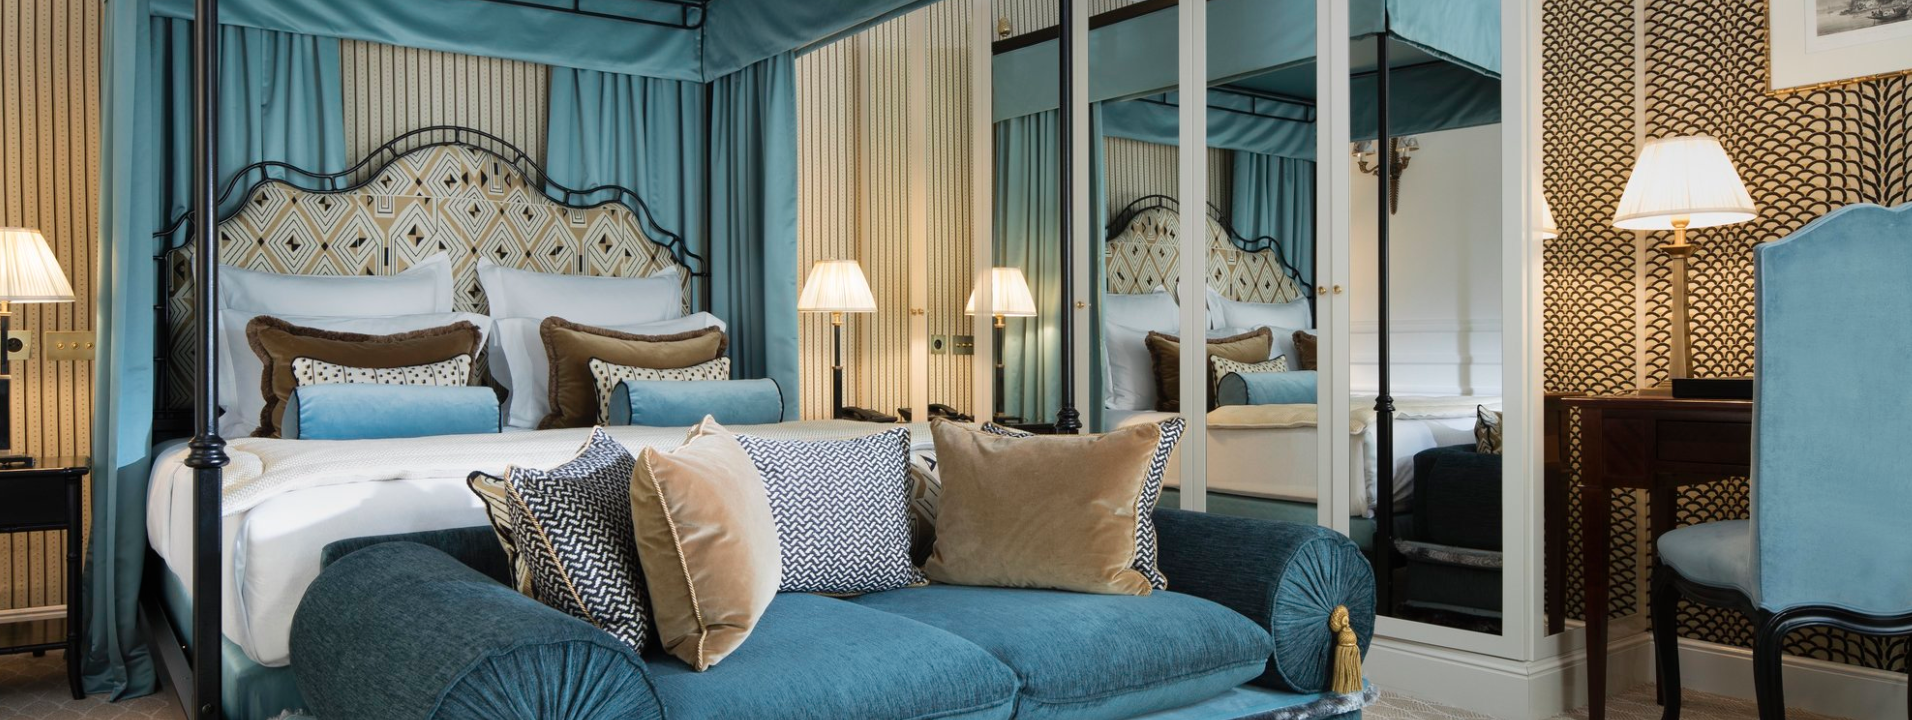 The Relais Christine offers Left Bank luxury that’s hard to leave behind